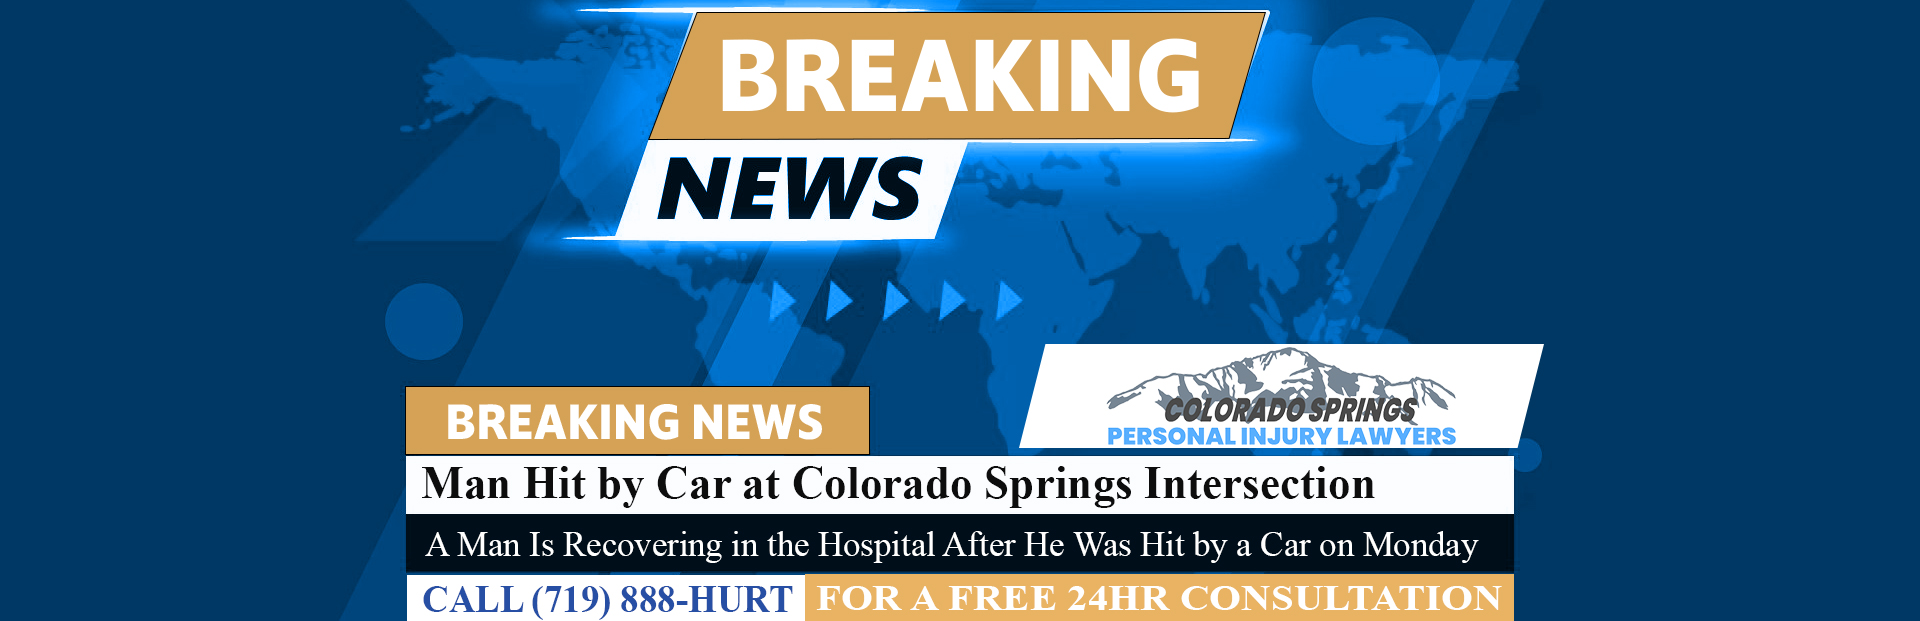 [10-18-23] Man, Possibly Intoxicated, Hit by Car at Colorado Springs Intersection